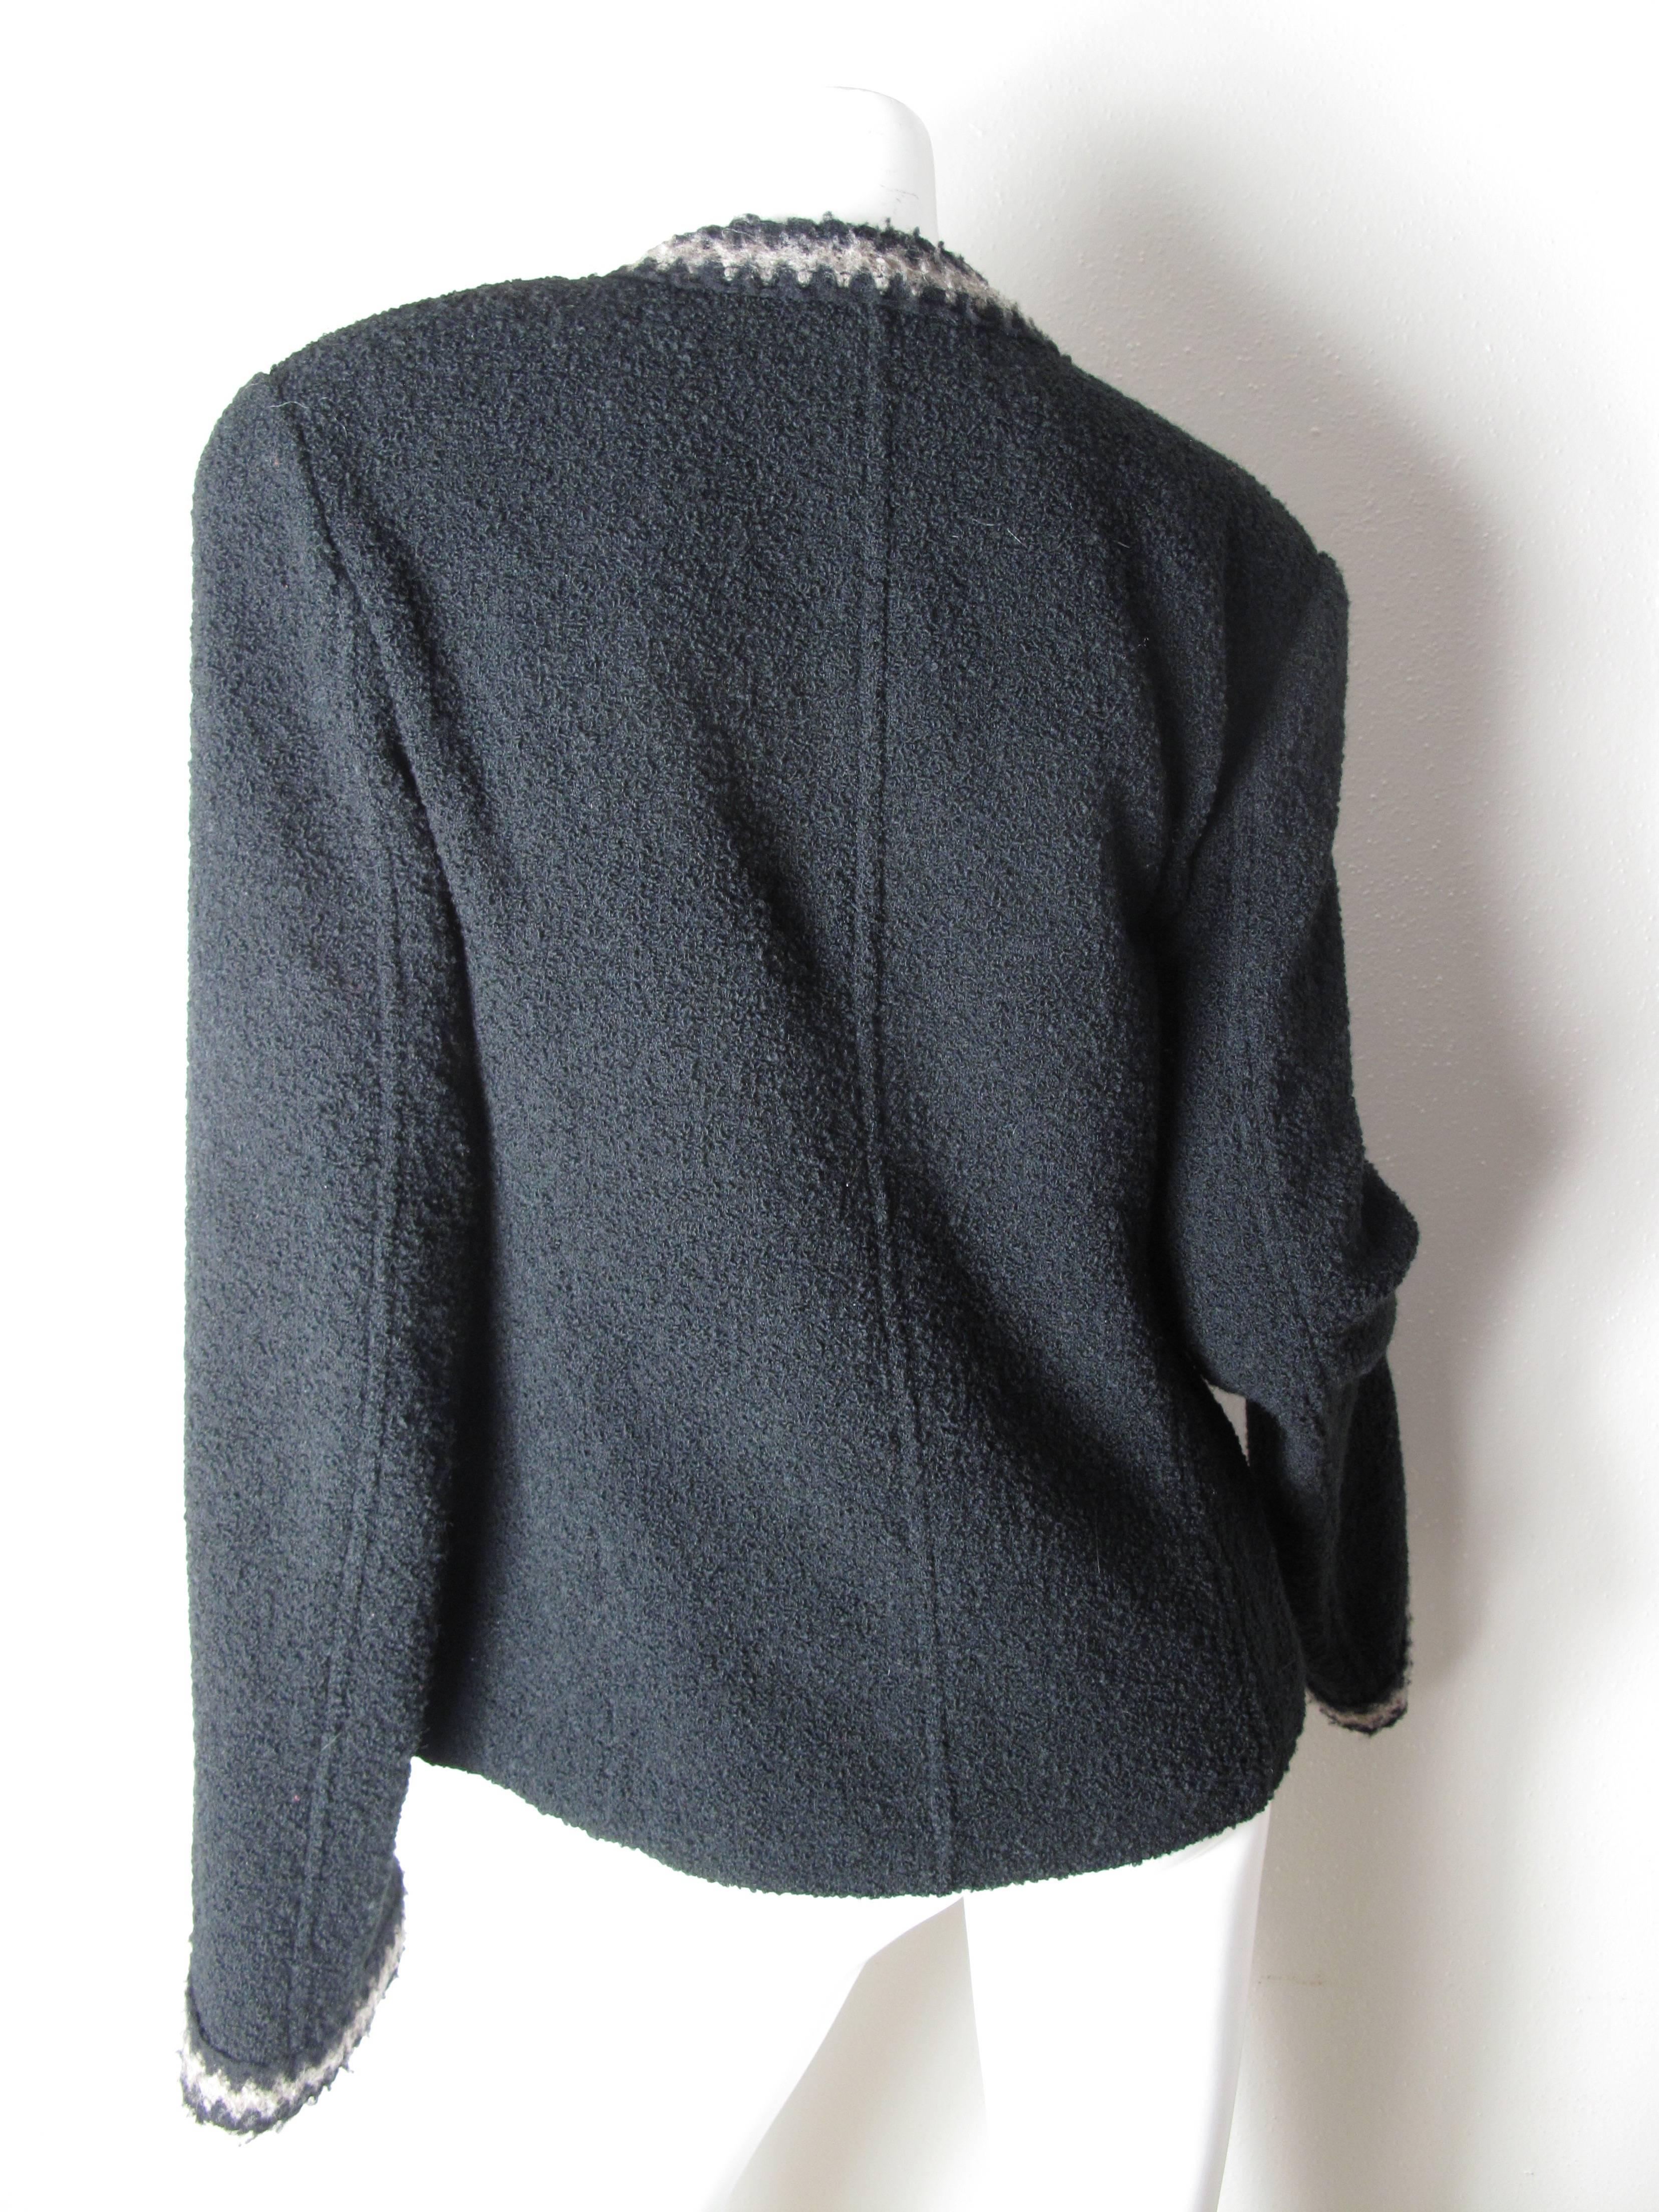 Chanel black boucle jacket, one button front closure, 40, taupe zig-zag trim down front, around collar, pockets, and cuffs, welt seaming, 40
Condition: Excellent.
We accept returns for refund, please see our terms.  We offer free ground shipping